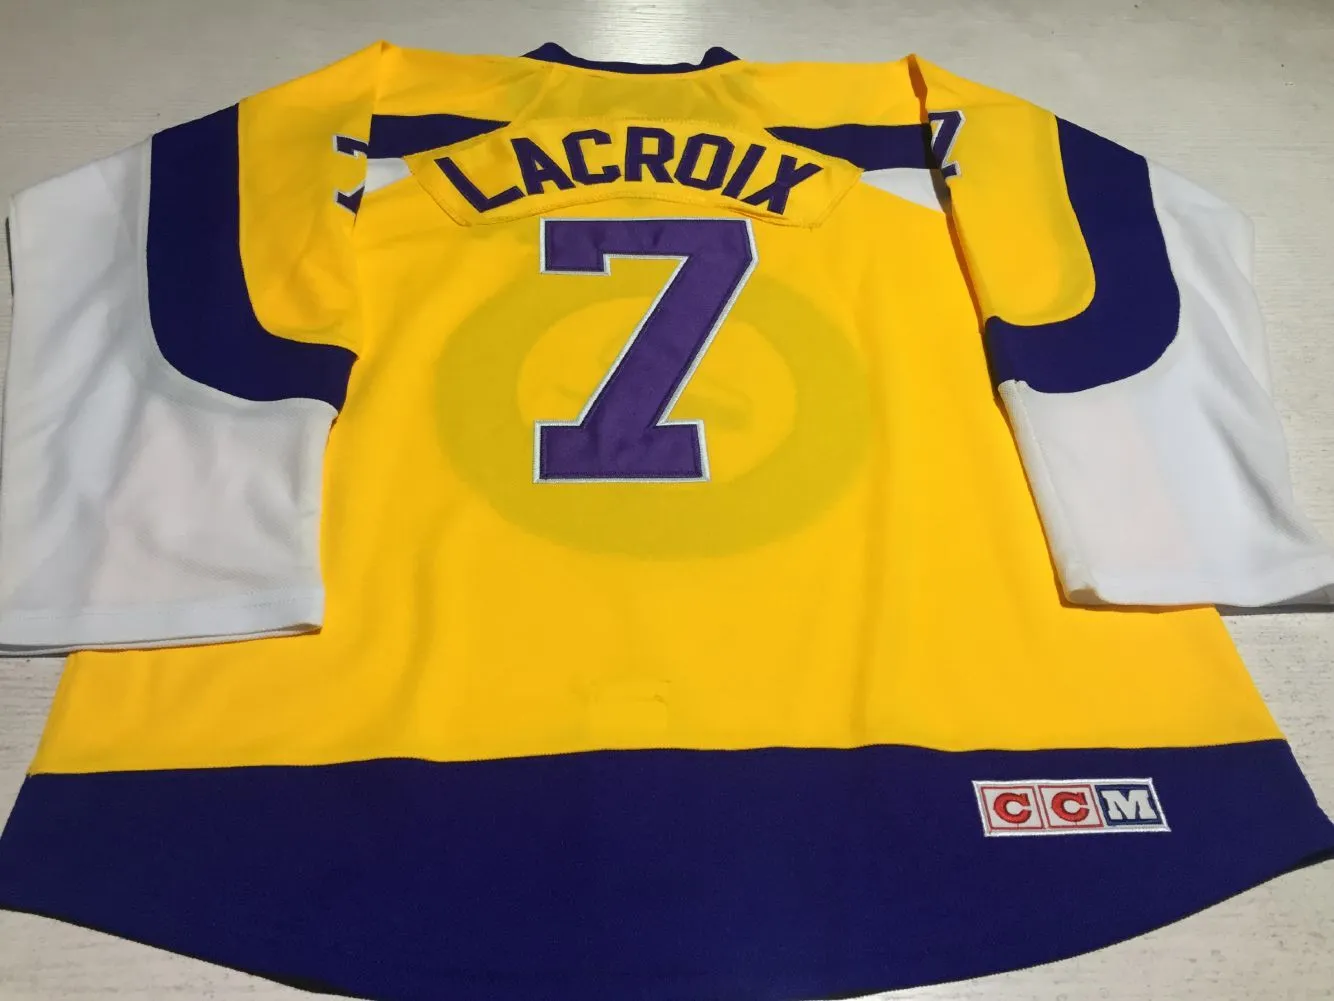 1973-74 CCM Andre Lacroix New York Golden Blade Wha Retro Hockey Jerseys Custom Any Number and Name S-5XL